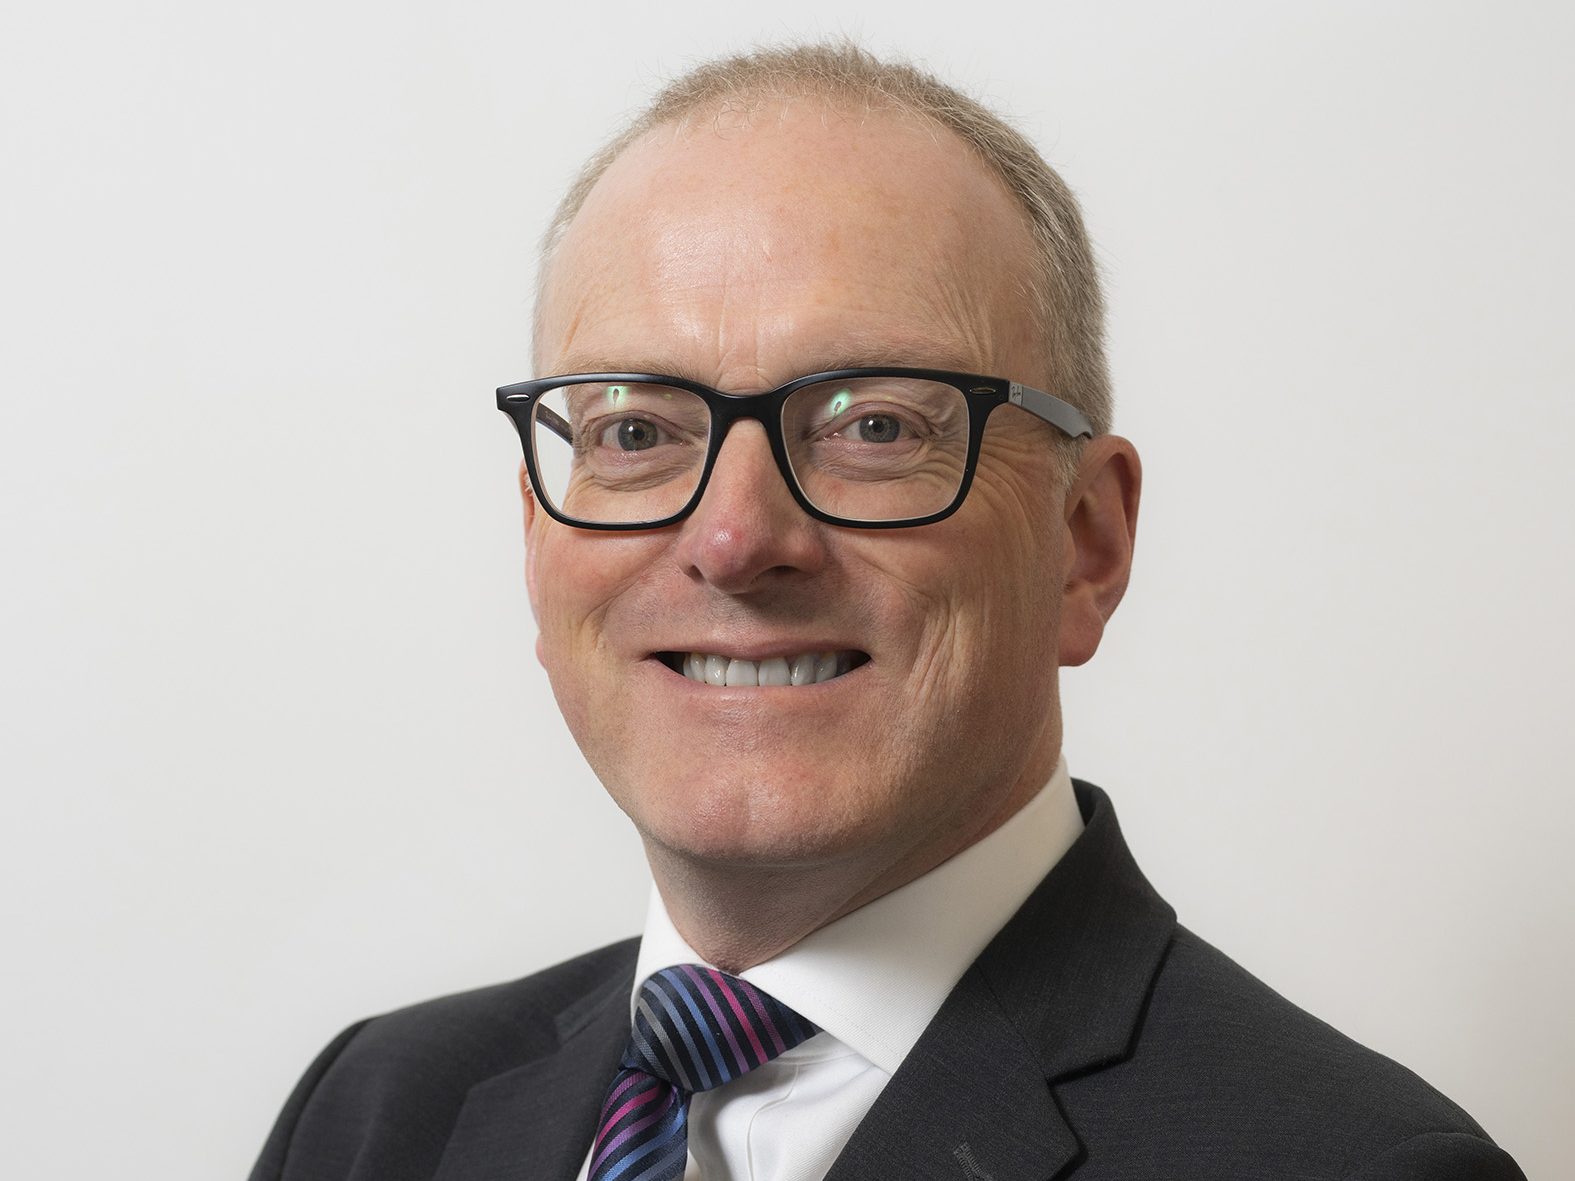 Dan Goulding, Swansea Building Society’s new BDM in Monmouthshire